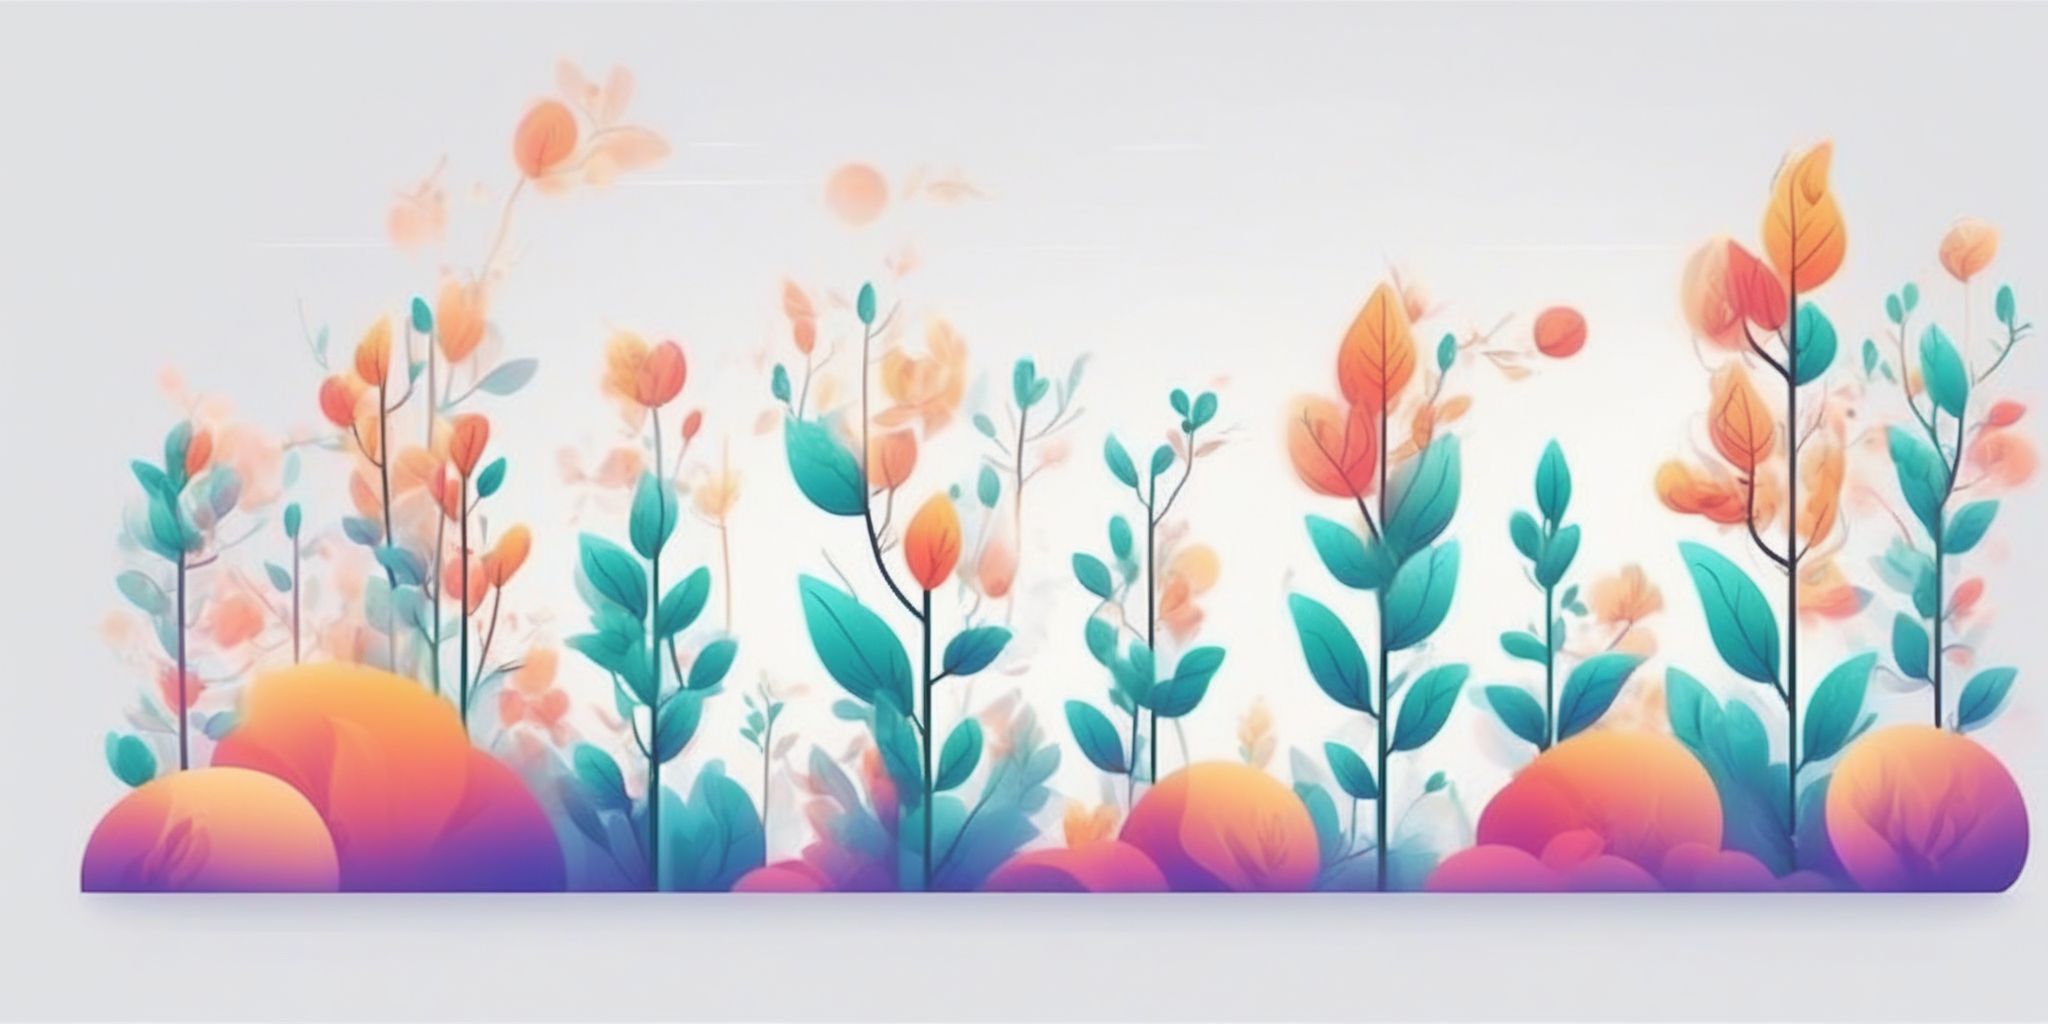 Growth in illustration style with gradients and white background